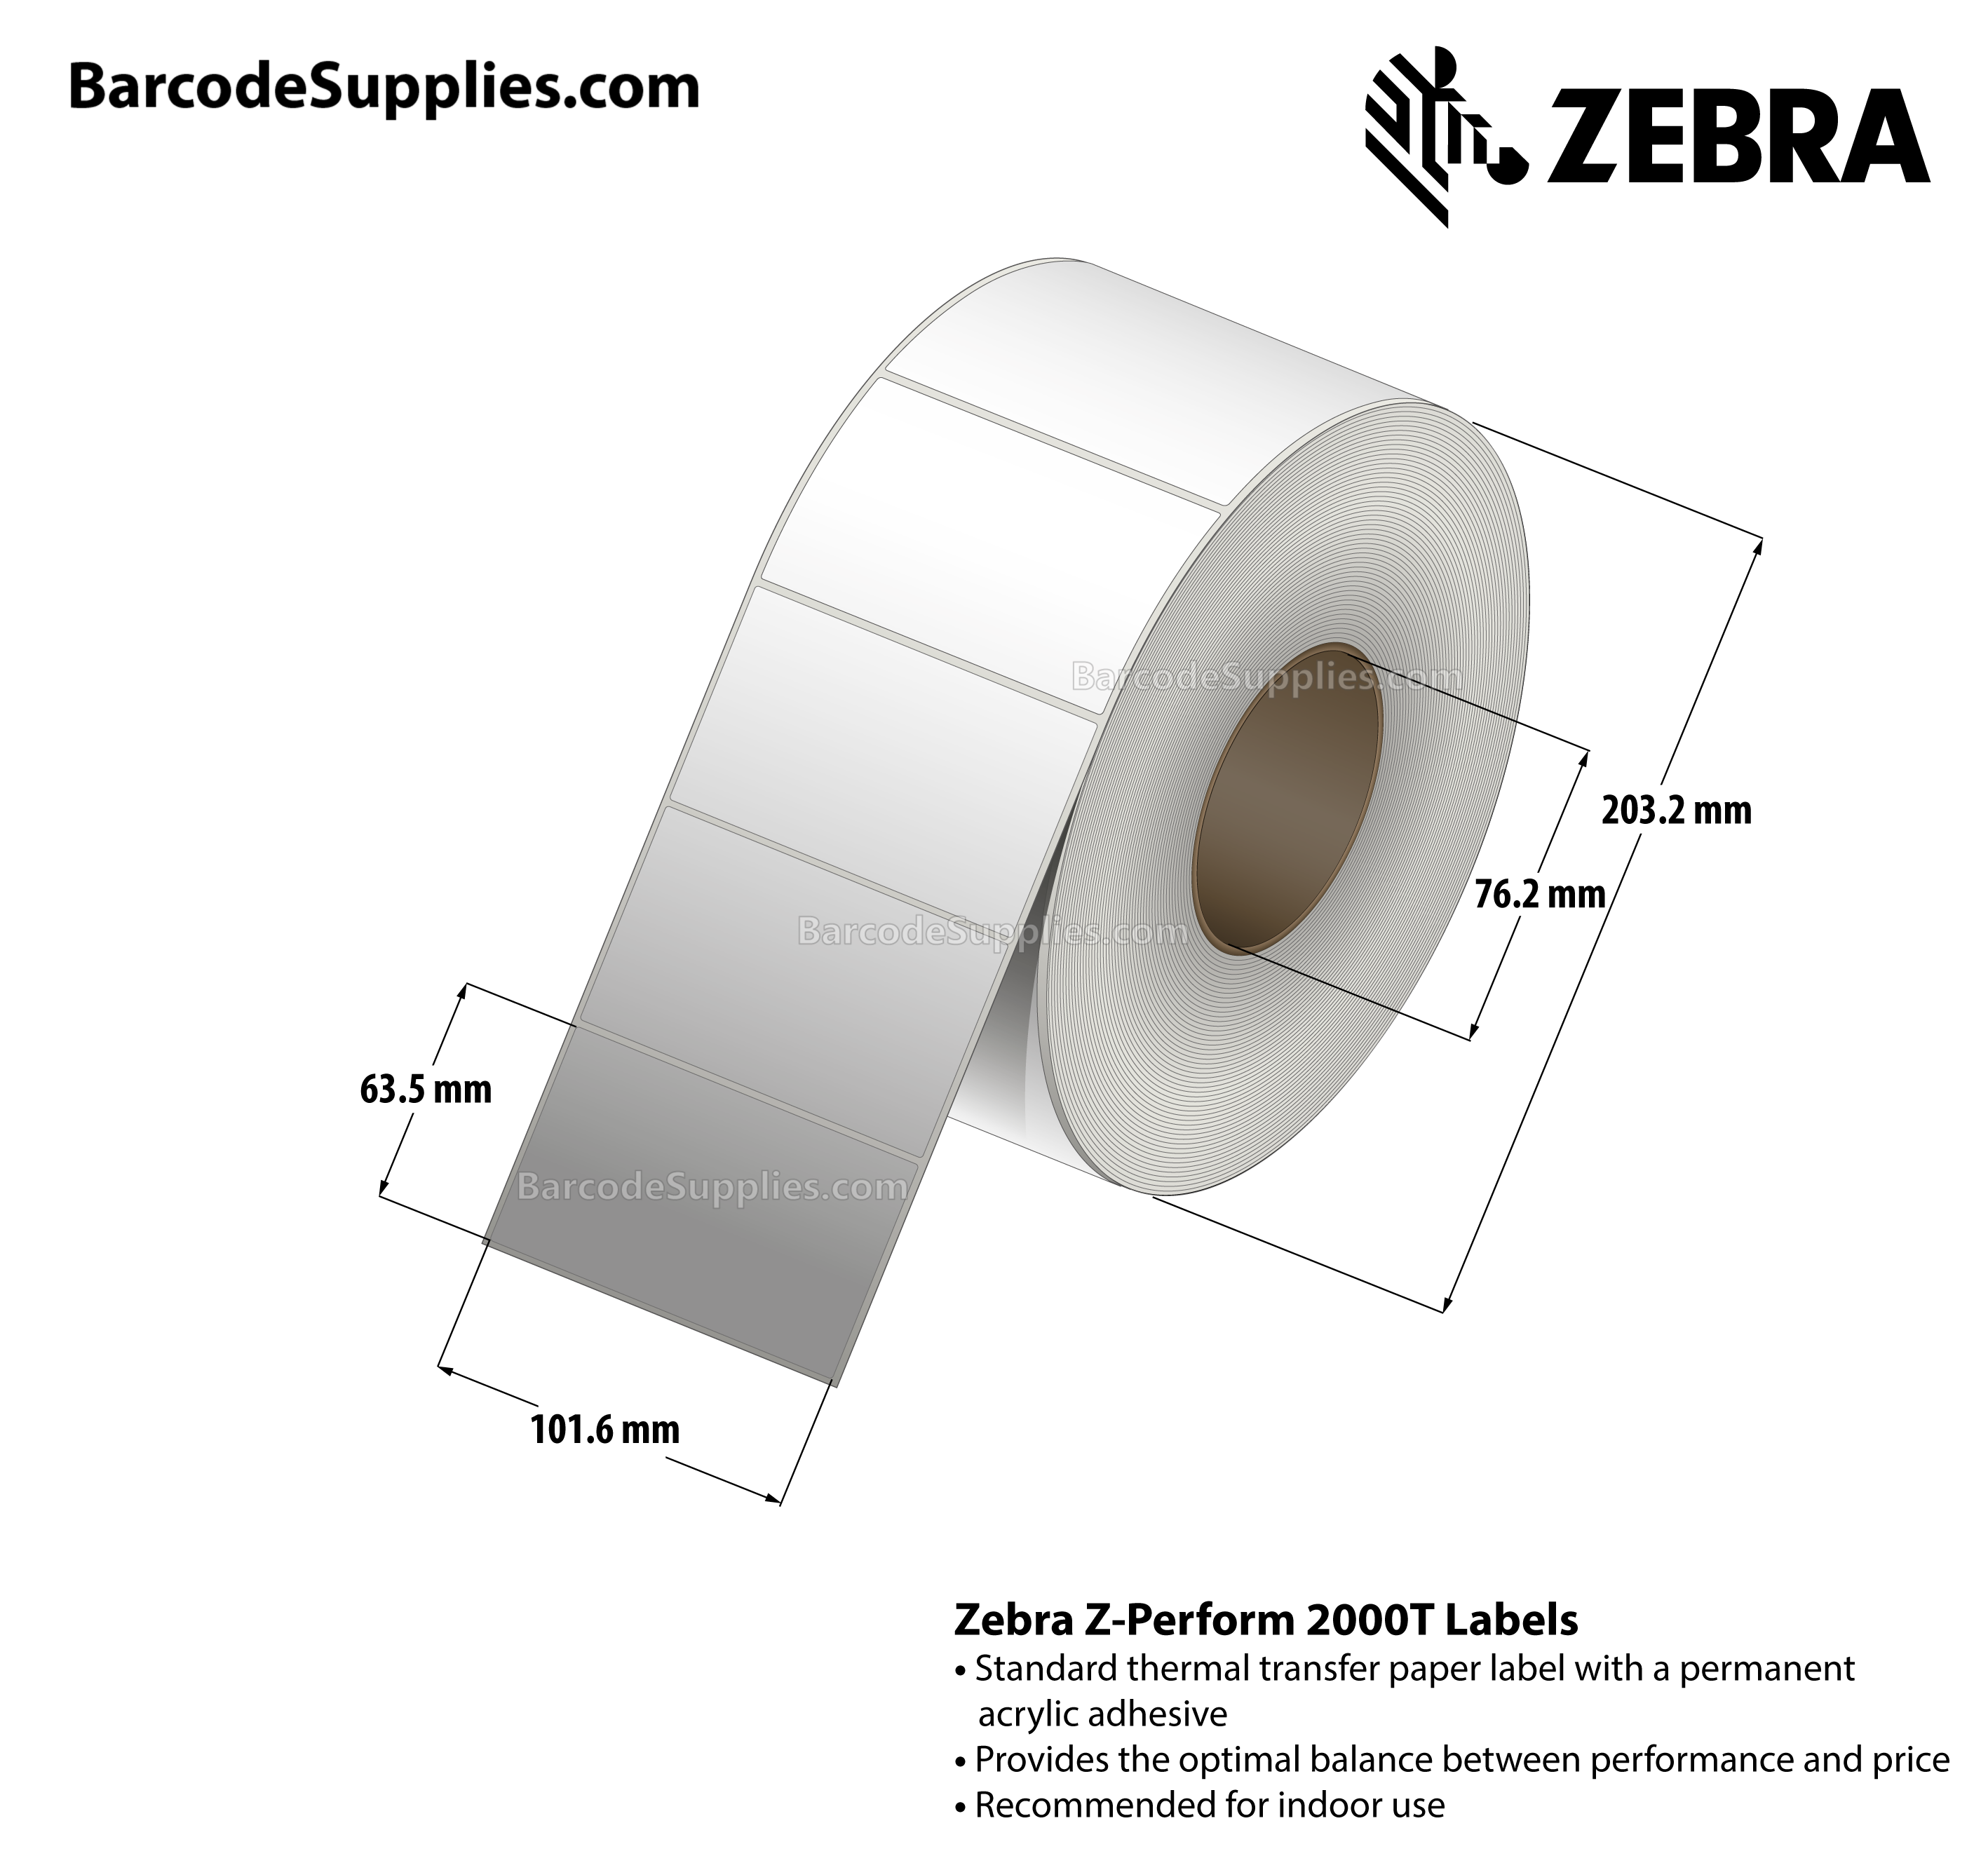 4 x 2.5 Thermal Transfer White Z-Perform 2000T All-Temp Labels With All-Temp Adhesive - Not Perforated - 2220 Labels Per Roll - Carton Of 4 Rolls - 8880 Labels Total - MPN: 72374